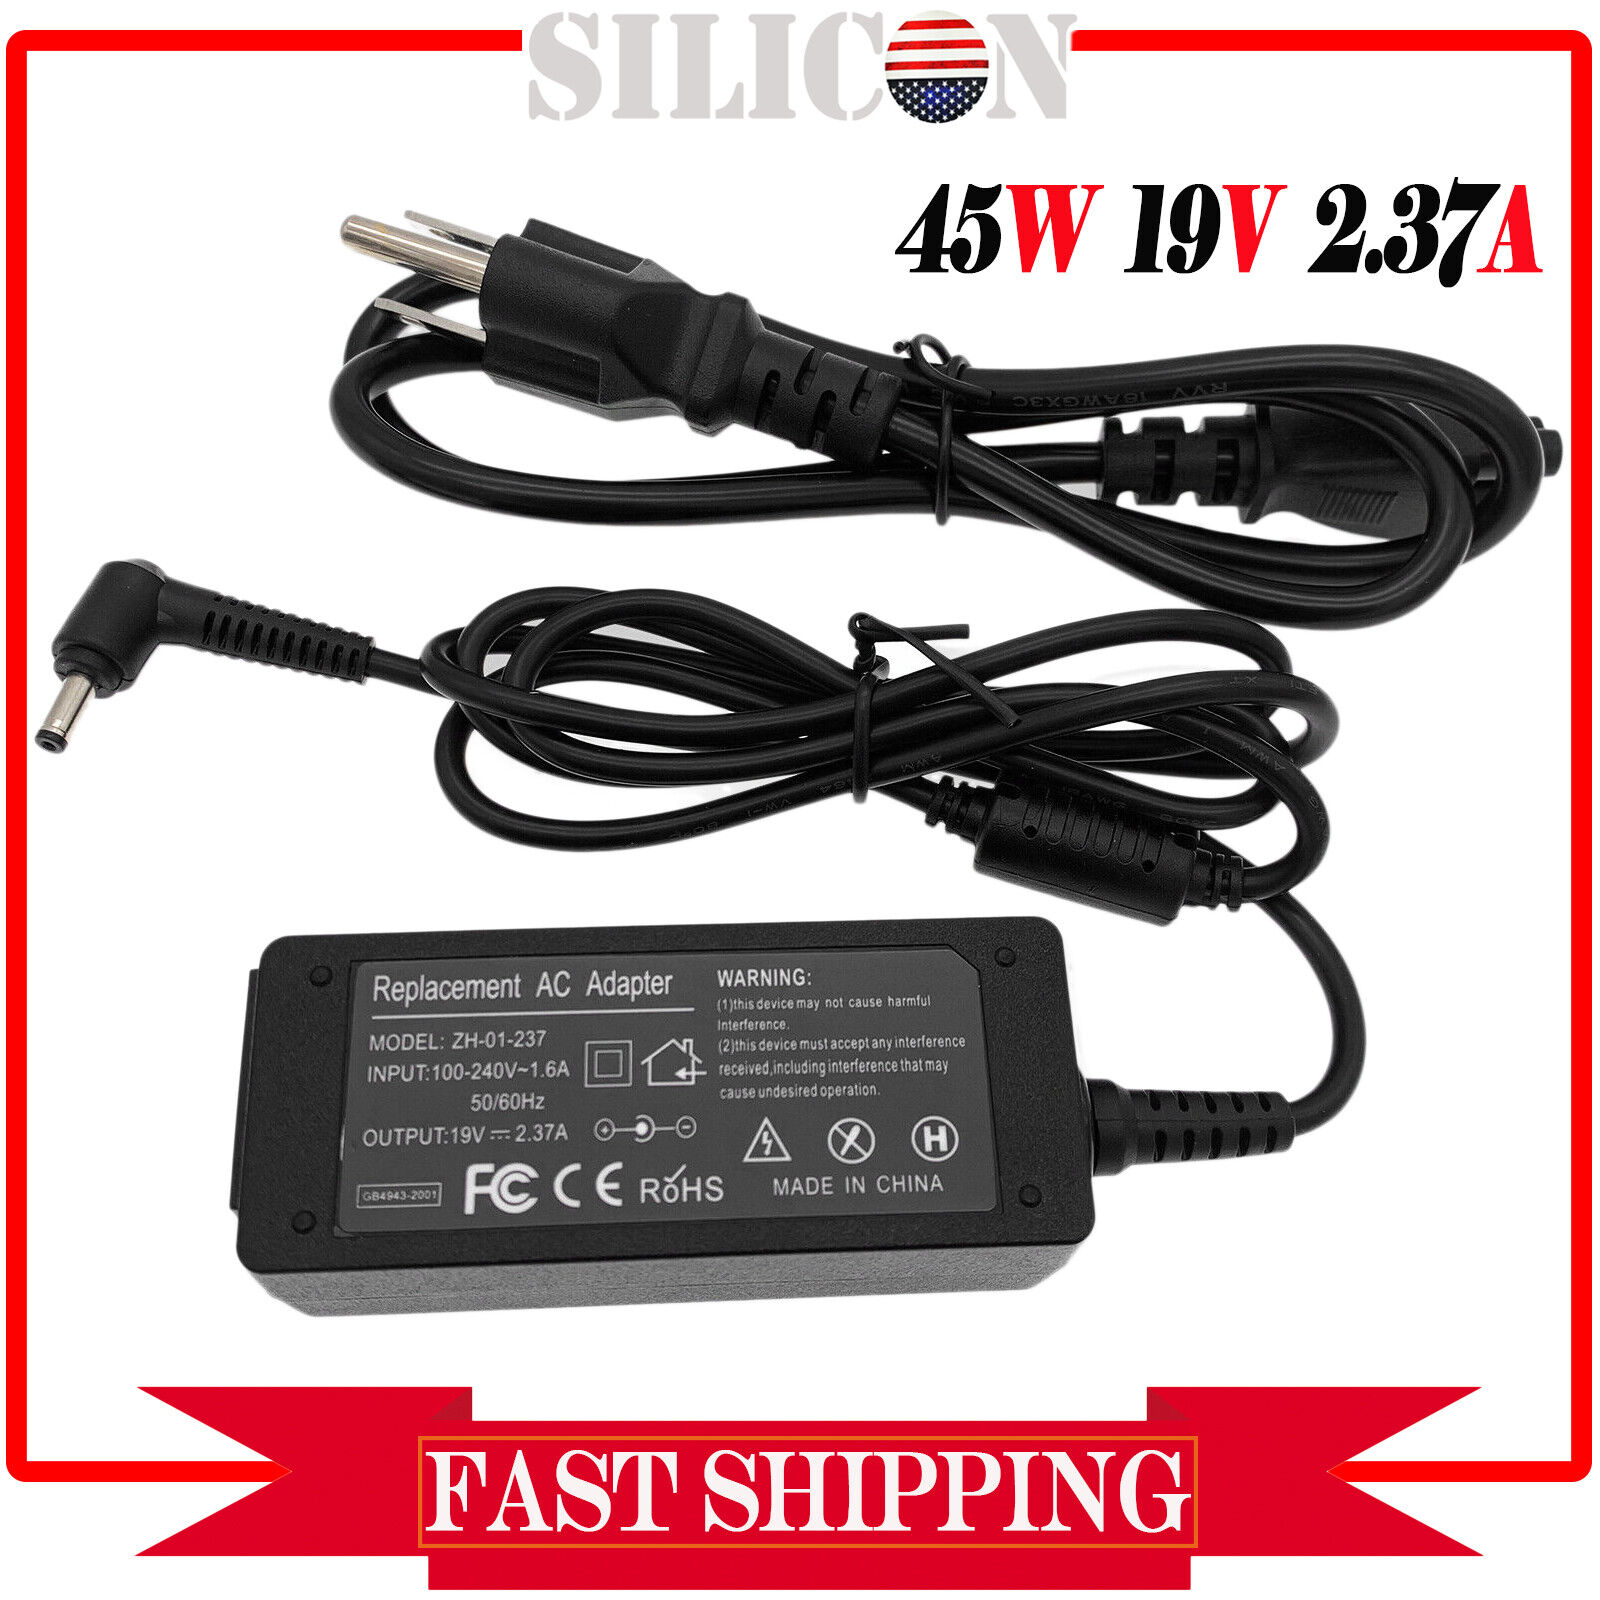 AC Adapter For ASUS E210 E210M E210MA-212.HCW11 Laptop Charger Power Supply Cord